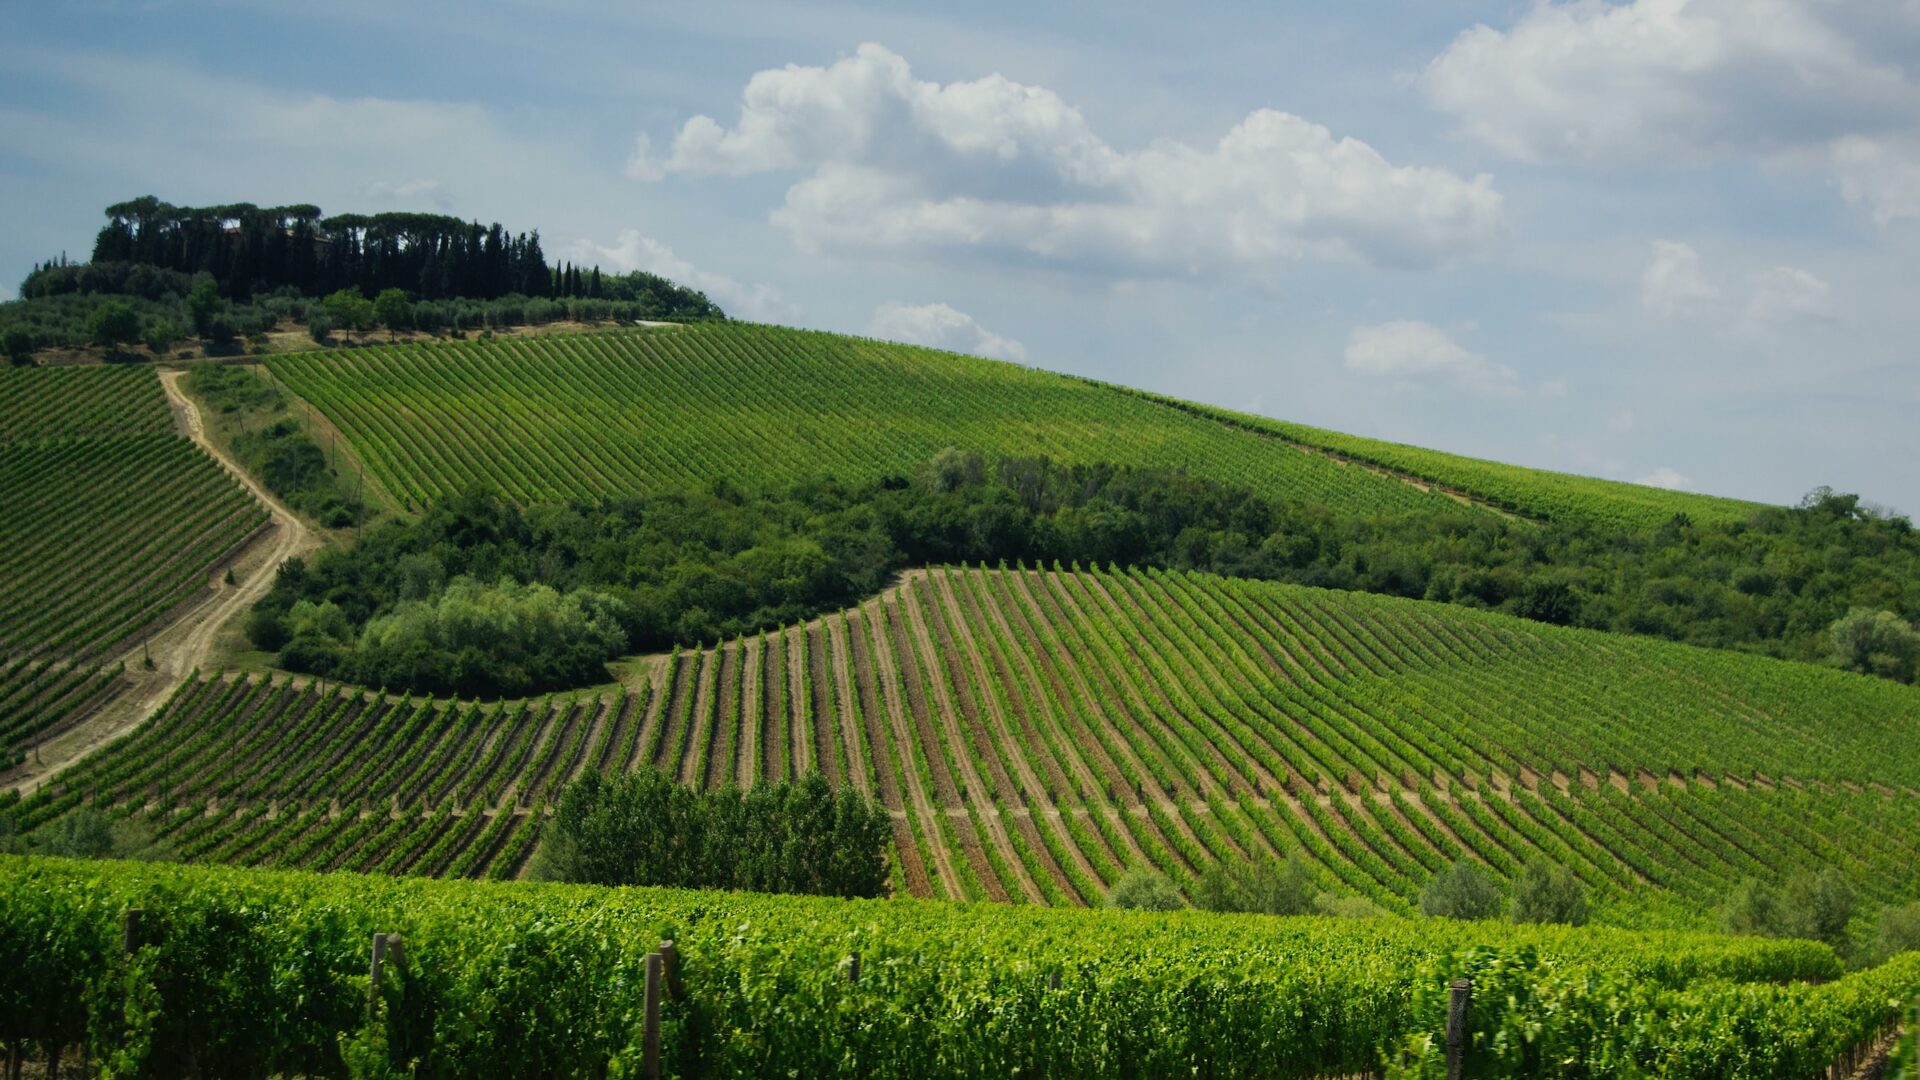 tuscany winery where to visit best in europe